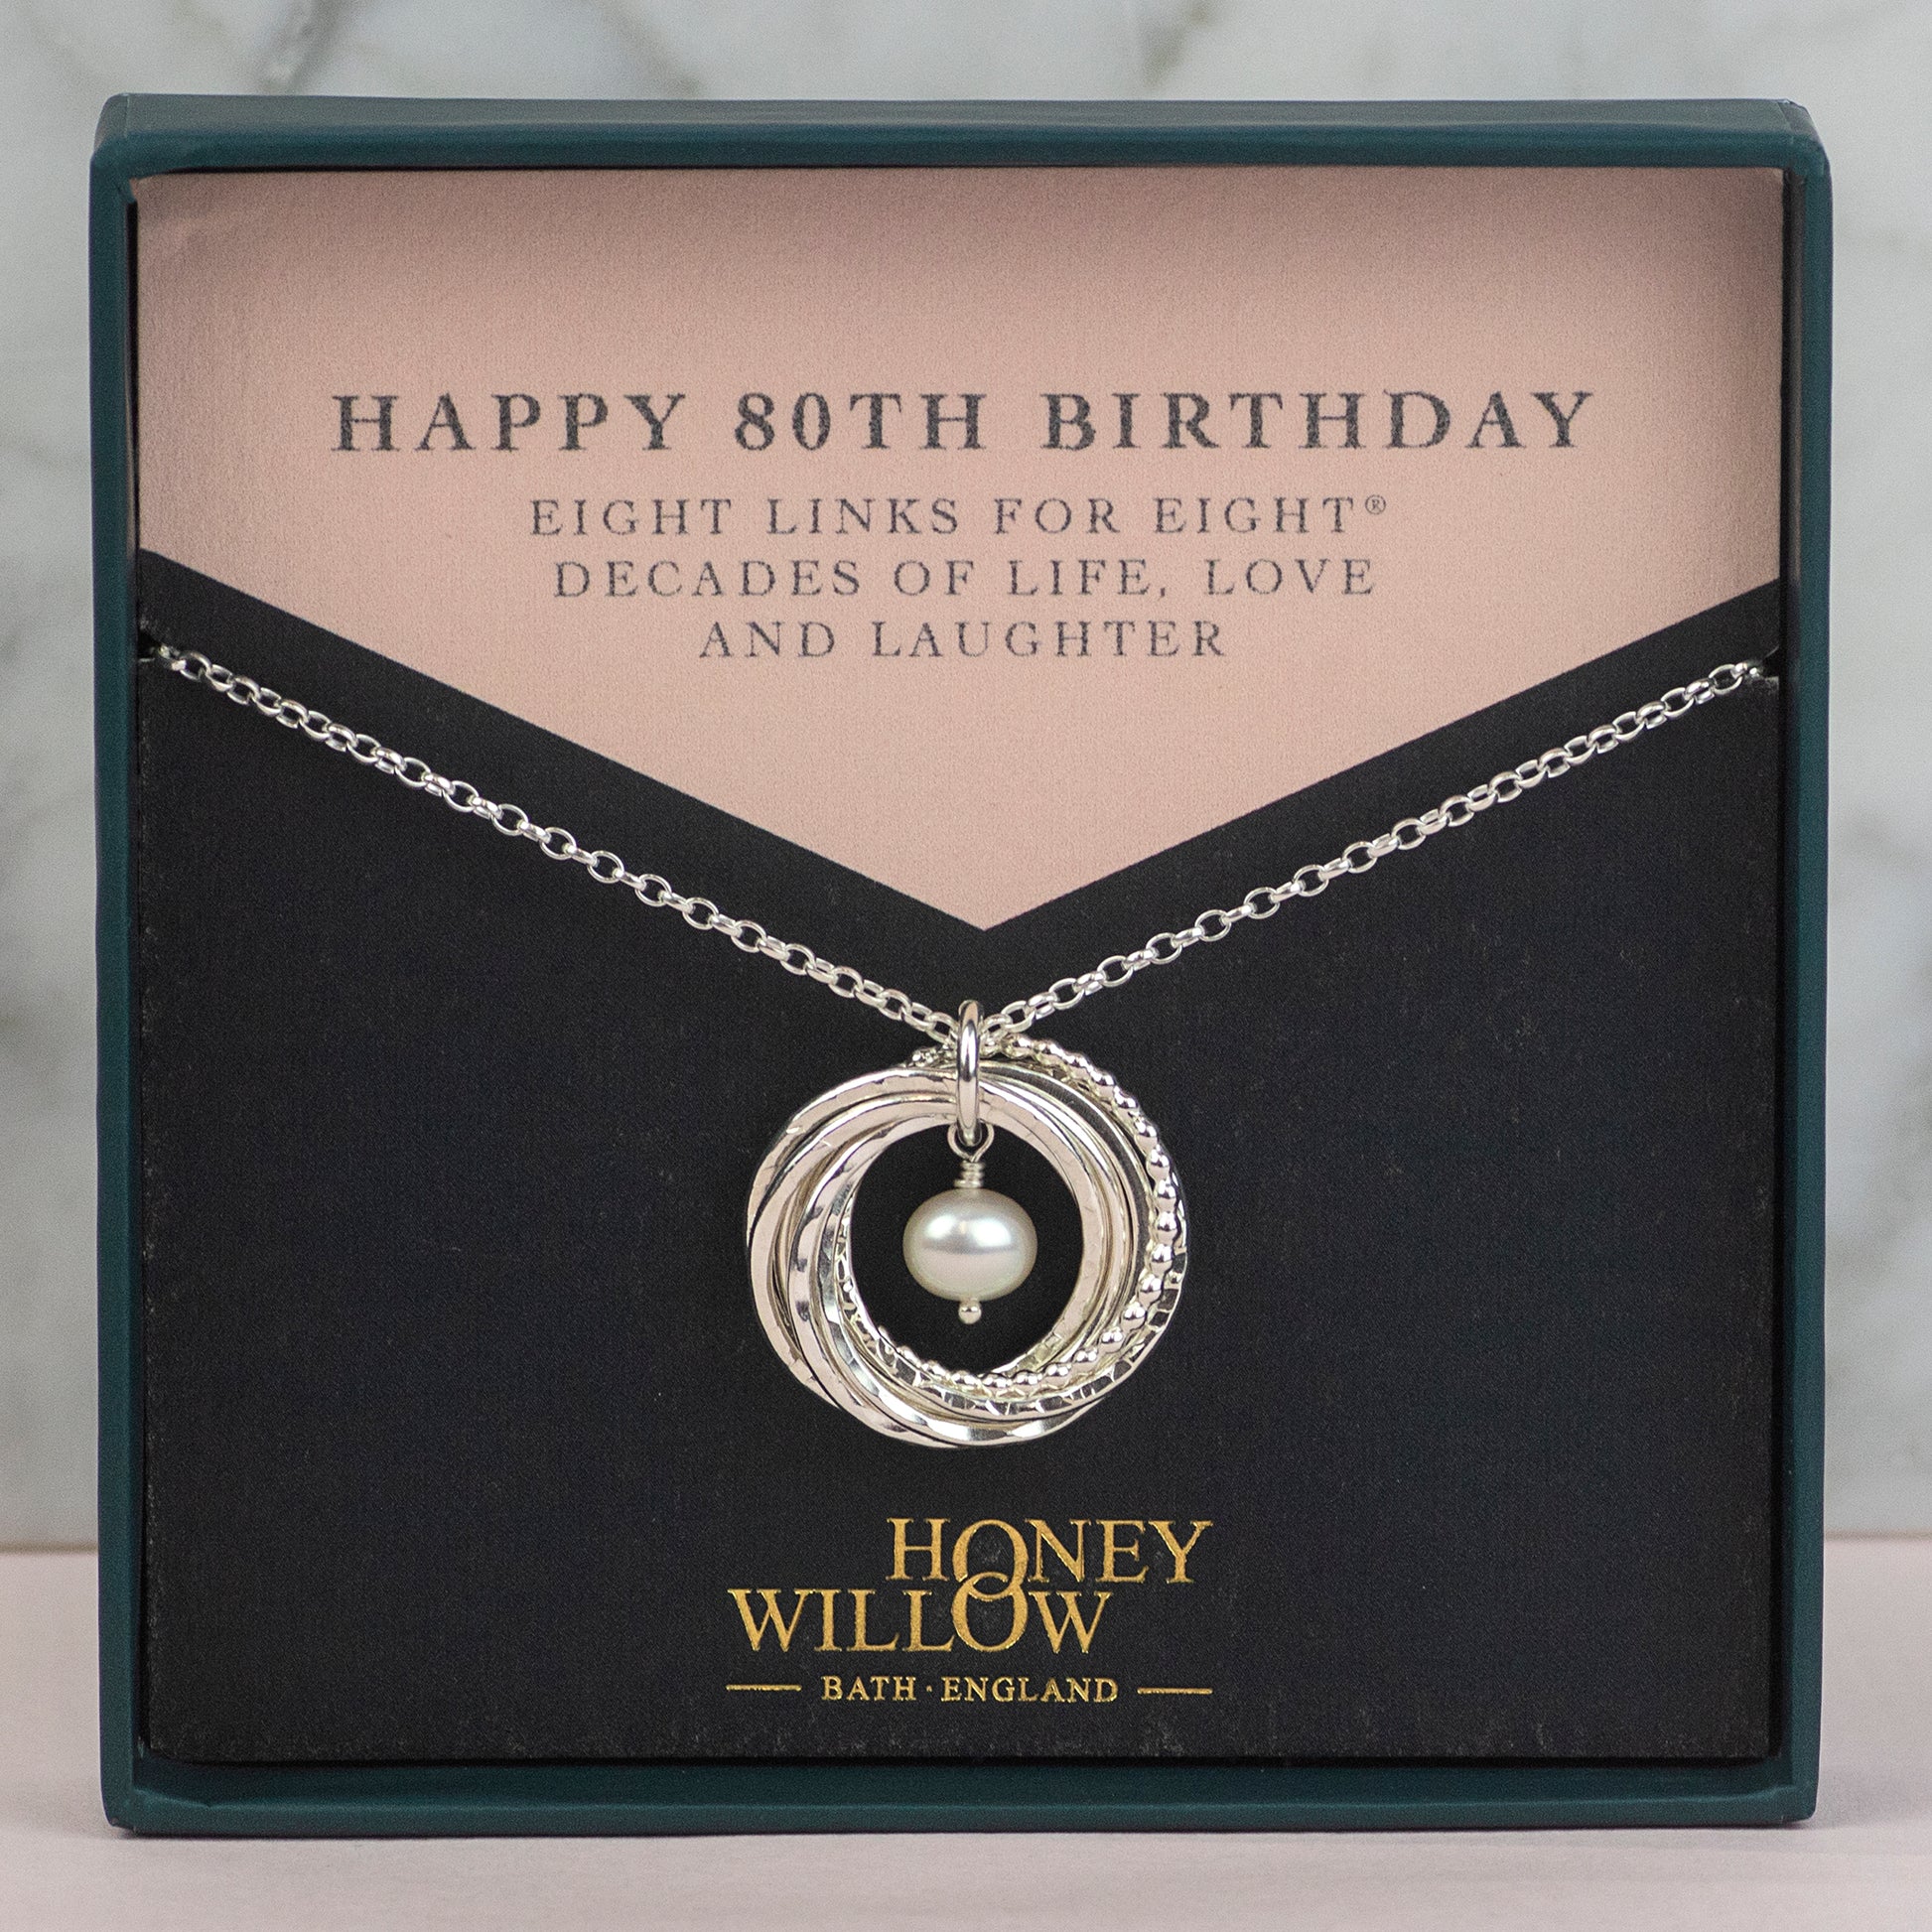 80th Birthday Birthstone Necklace - Silver - The Original 8 Links for 8 Decades Necklace